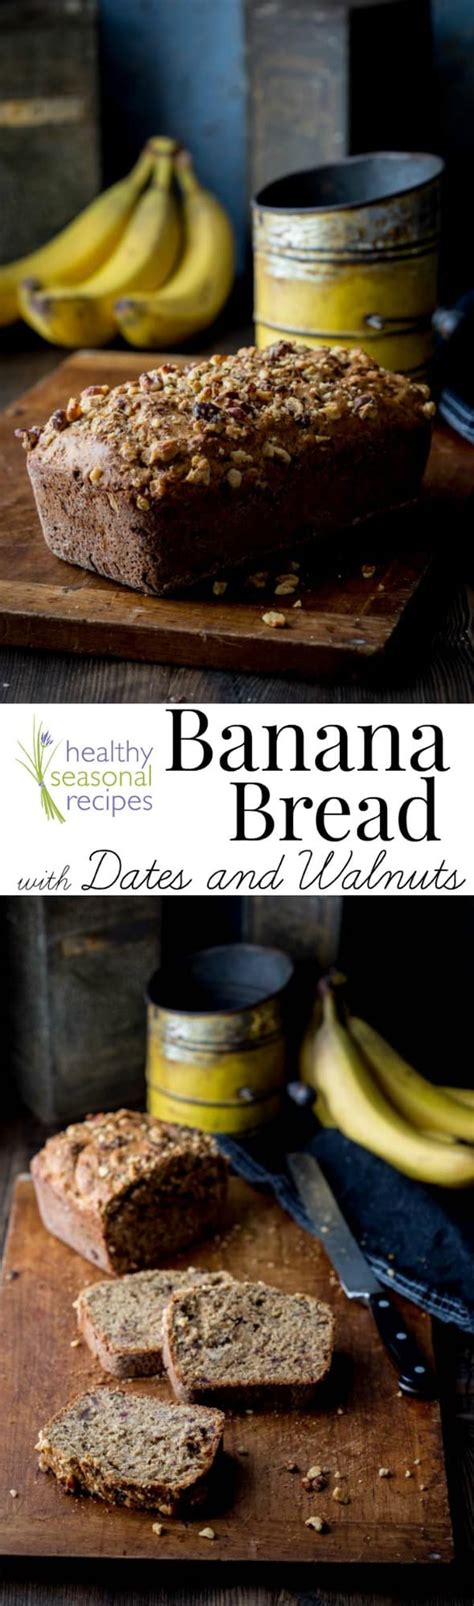 Spread slices with honey or serve with ice cream. banana bread with dates and walnuts - Healthy Seasonal Recipes